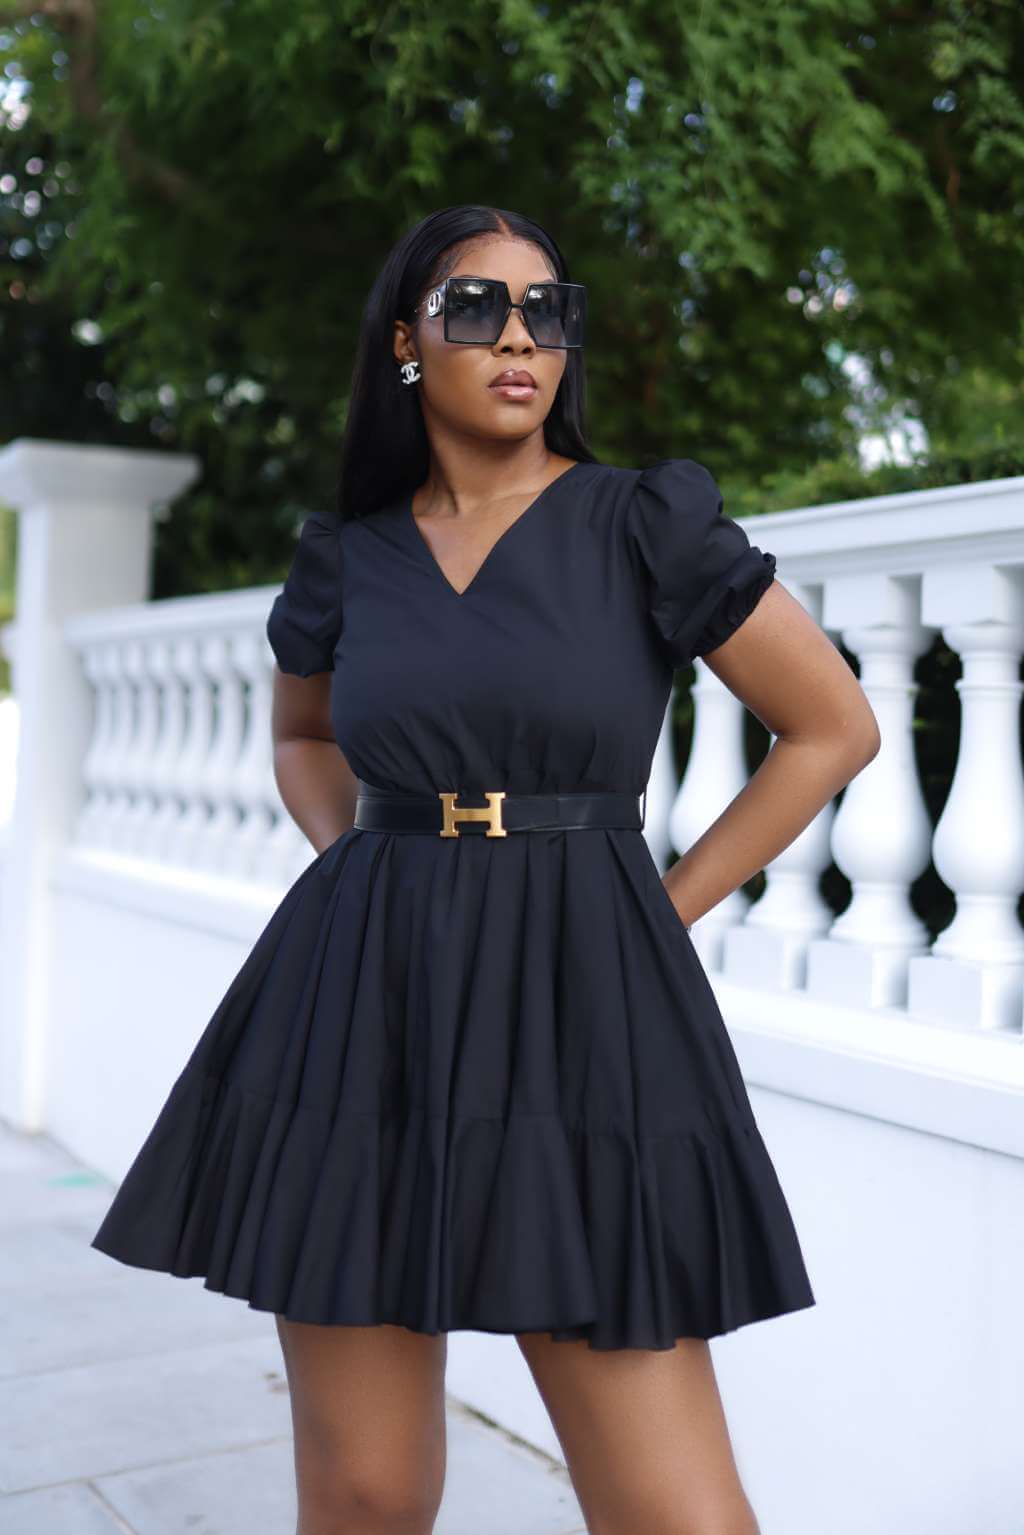 This dress gives you classic vibes yet a cool look. The gathered hem design gives it volume, which will make you look super expensive without even trying. Complete with the belt to snatch your waist and look even more flattering.